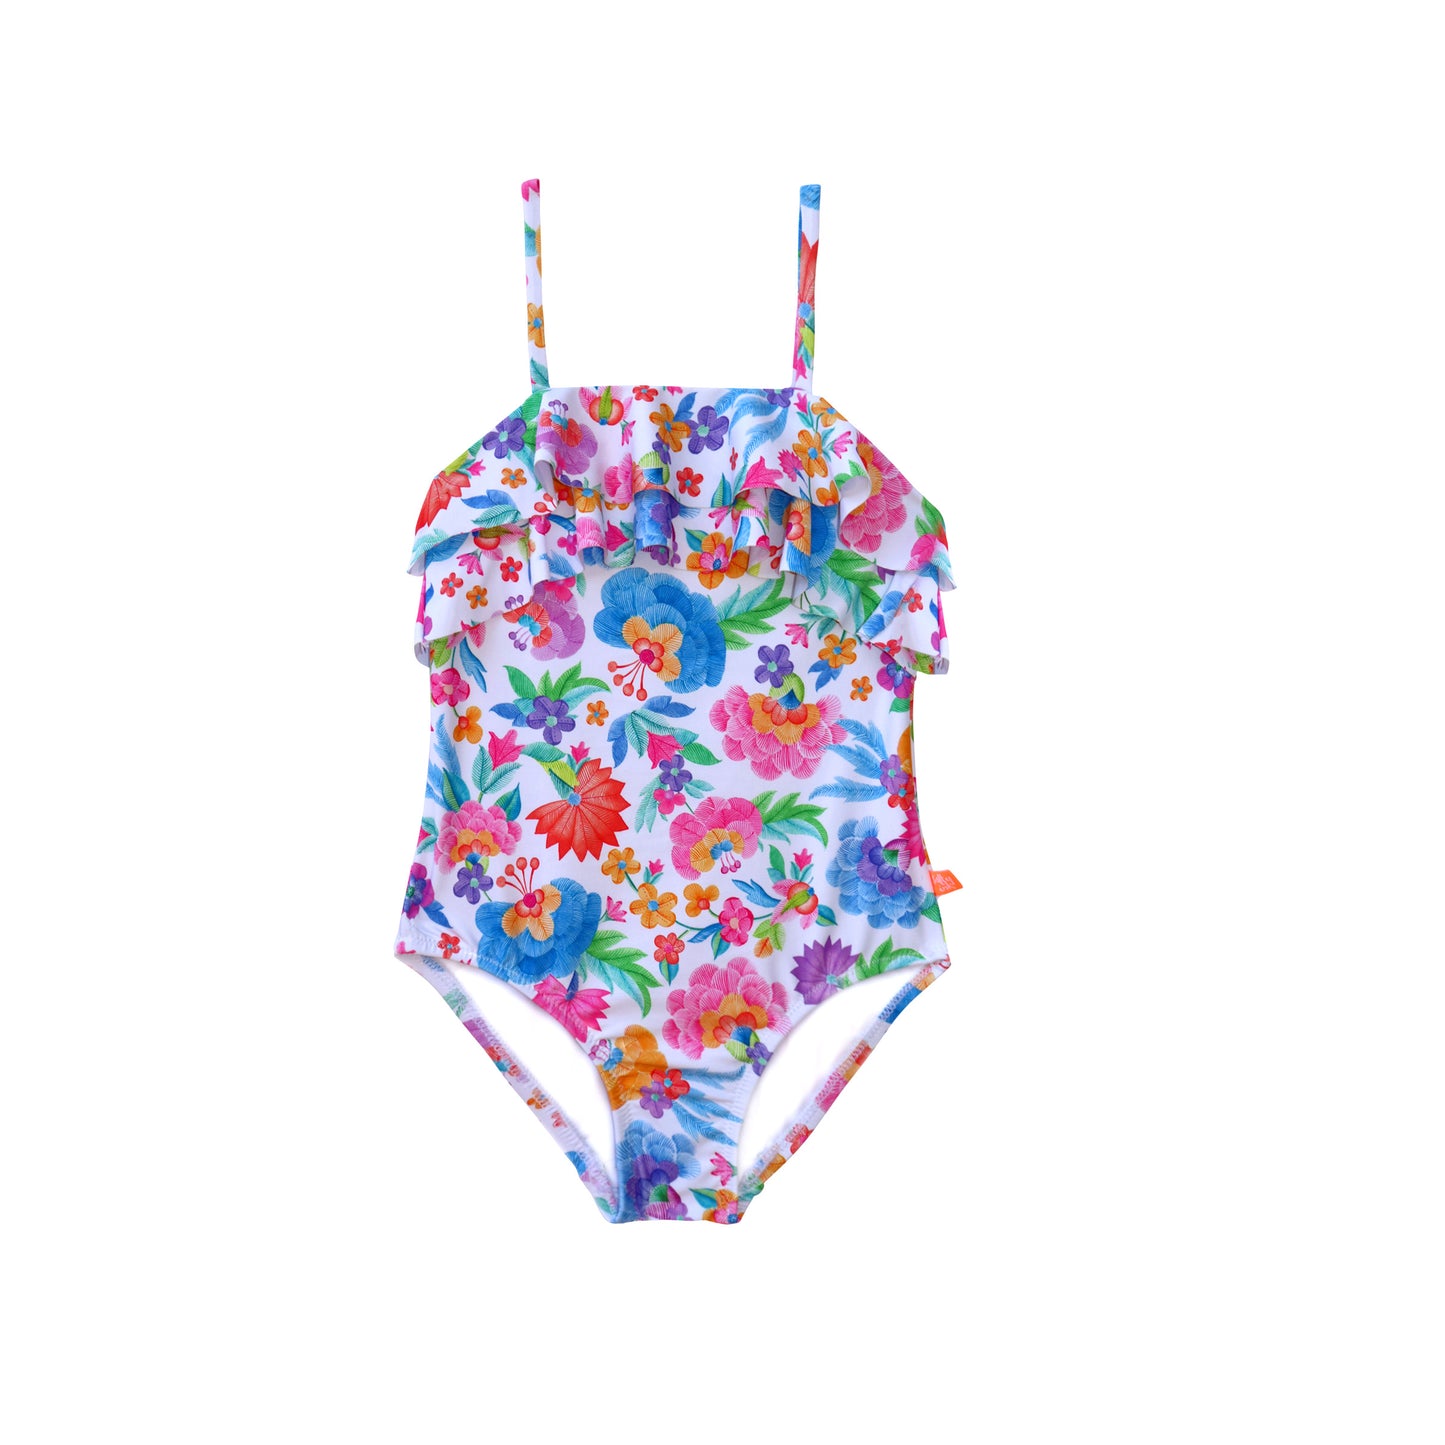 1450 Miss Leilani One pIece